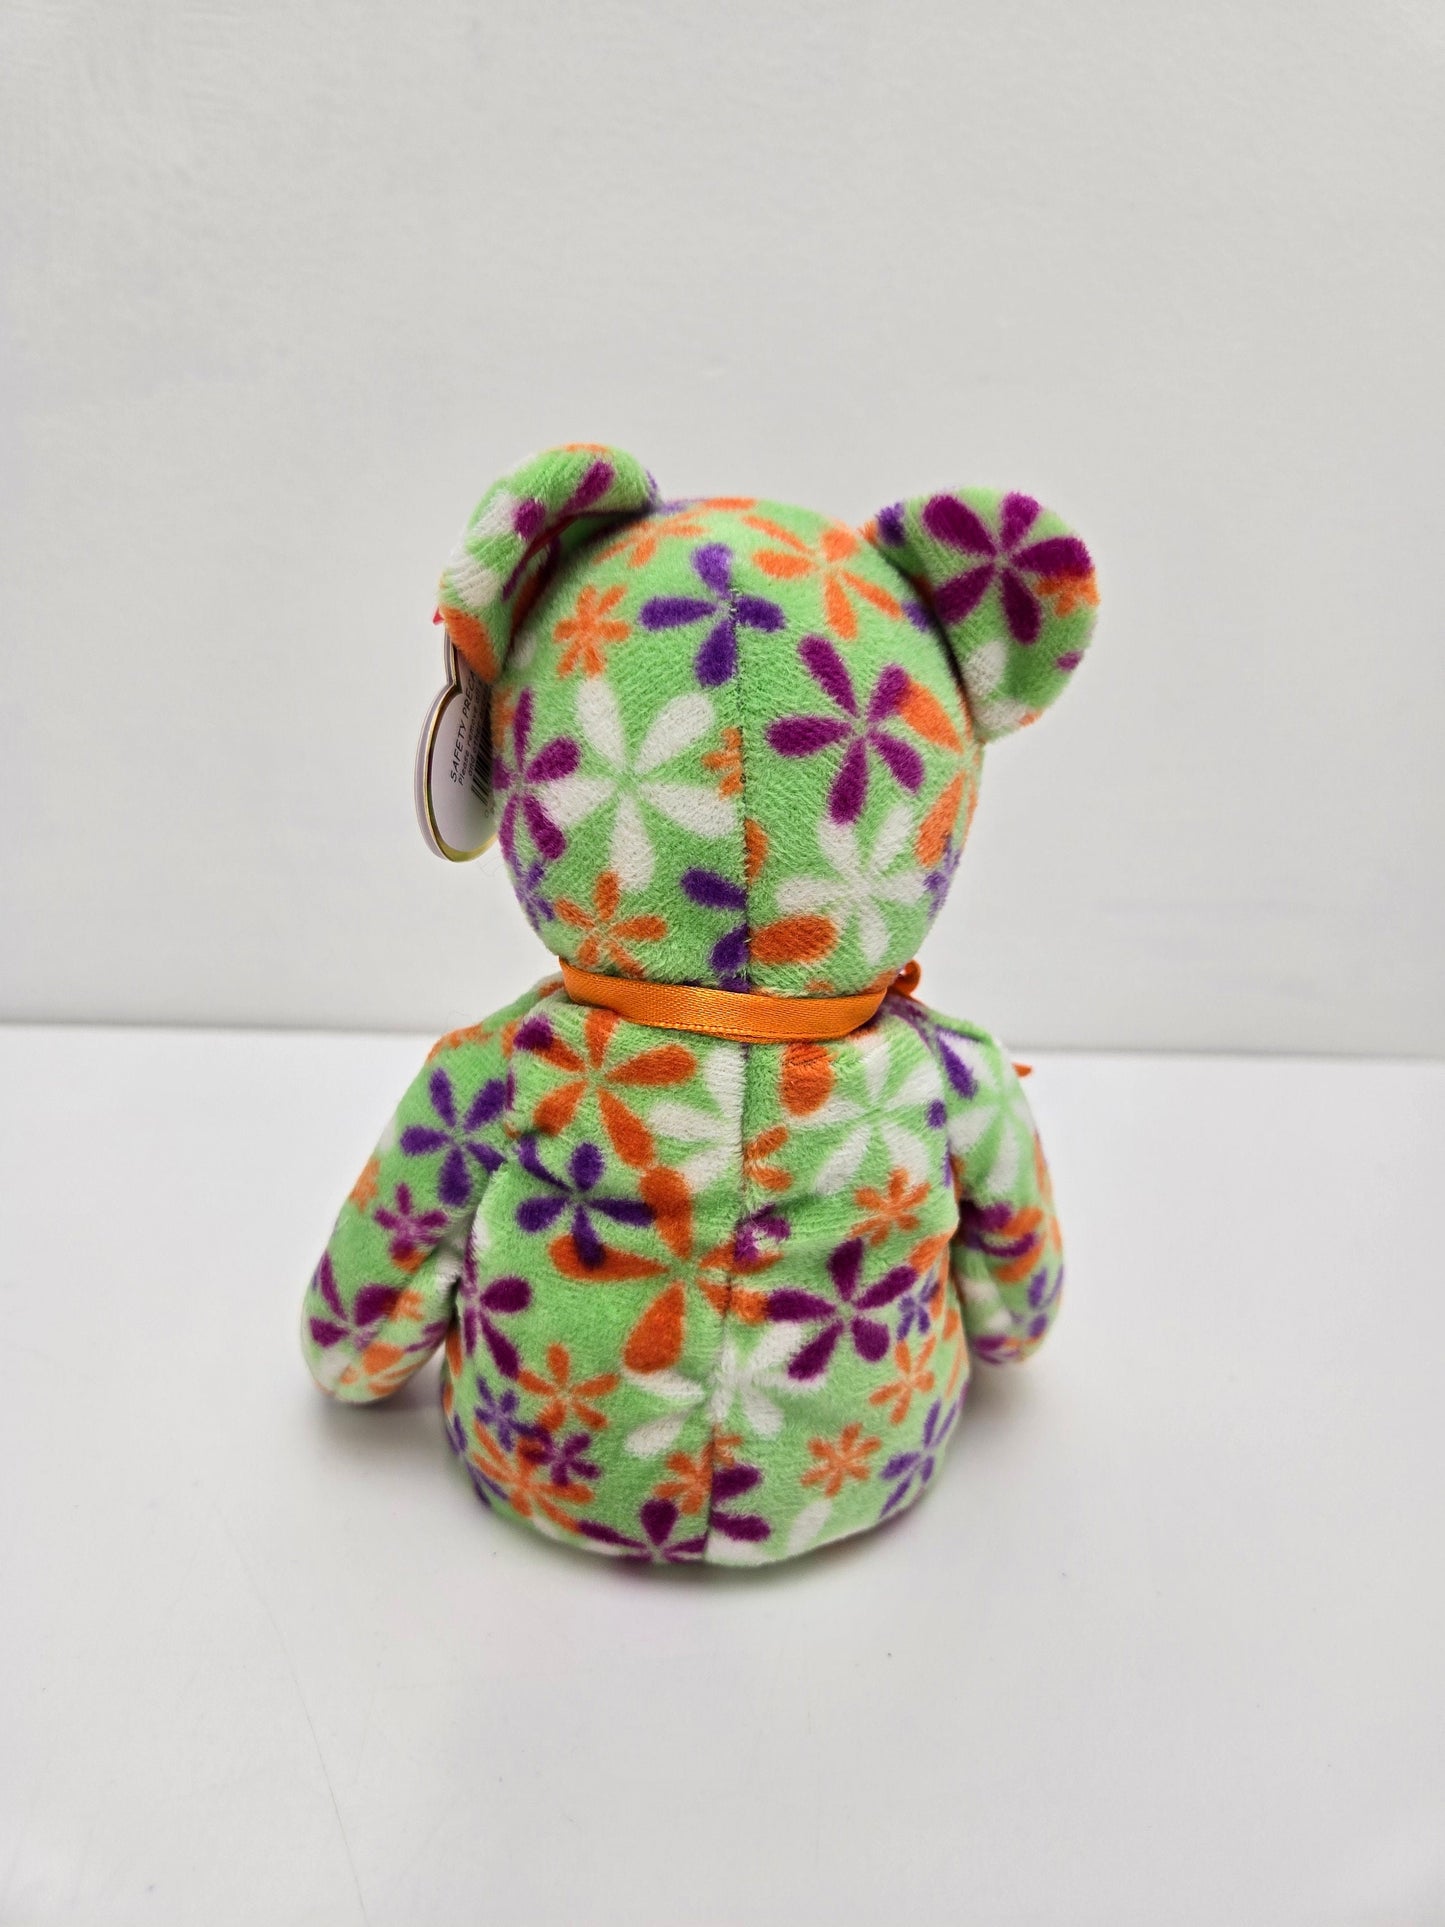 Ty Beanie Baby “Groovey” the Bear (8.5 inch)